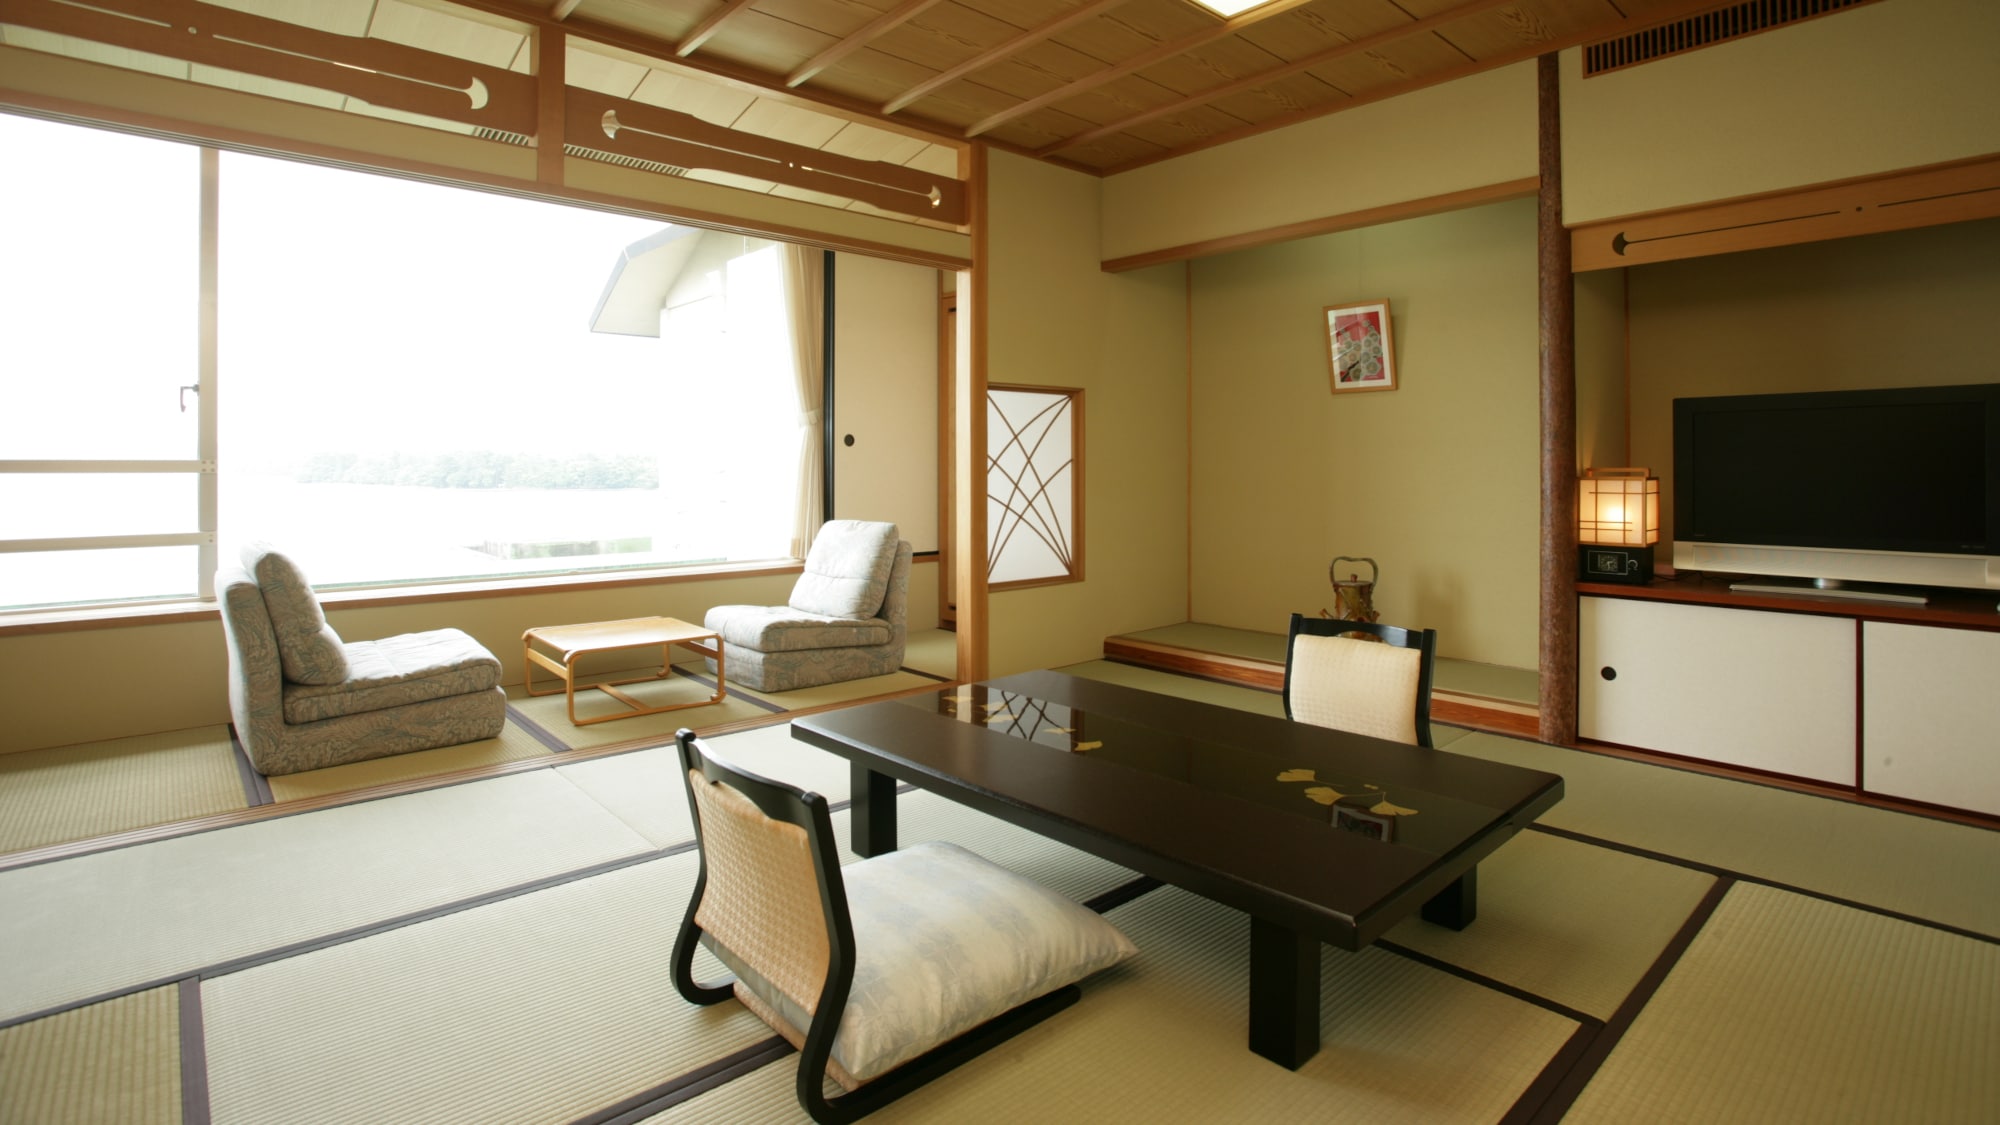 An example of a Japanese-style room with a view bath